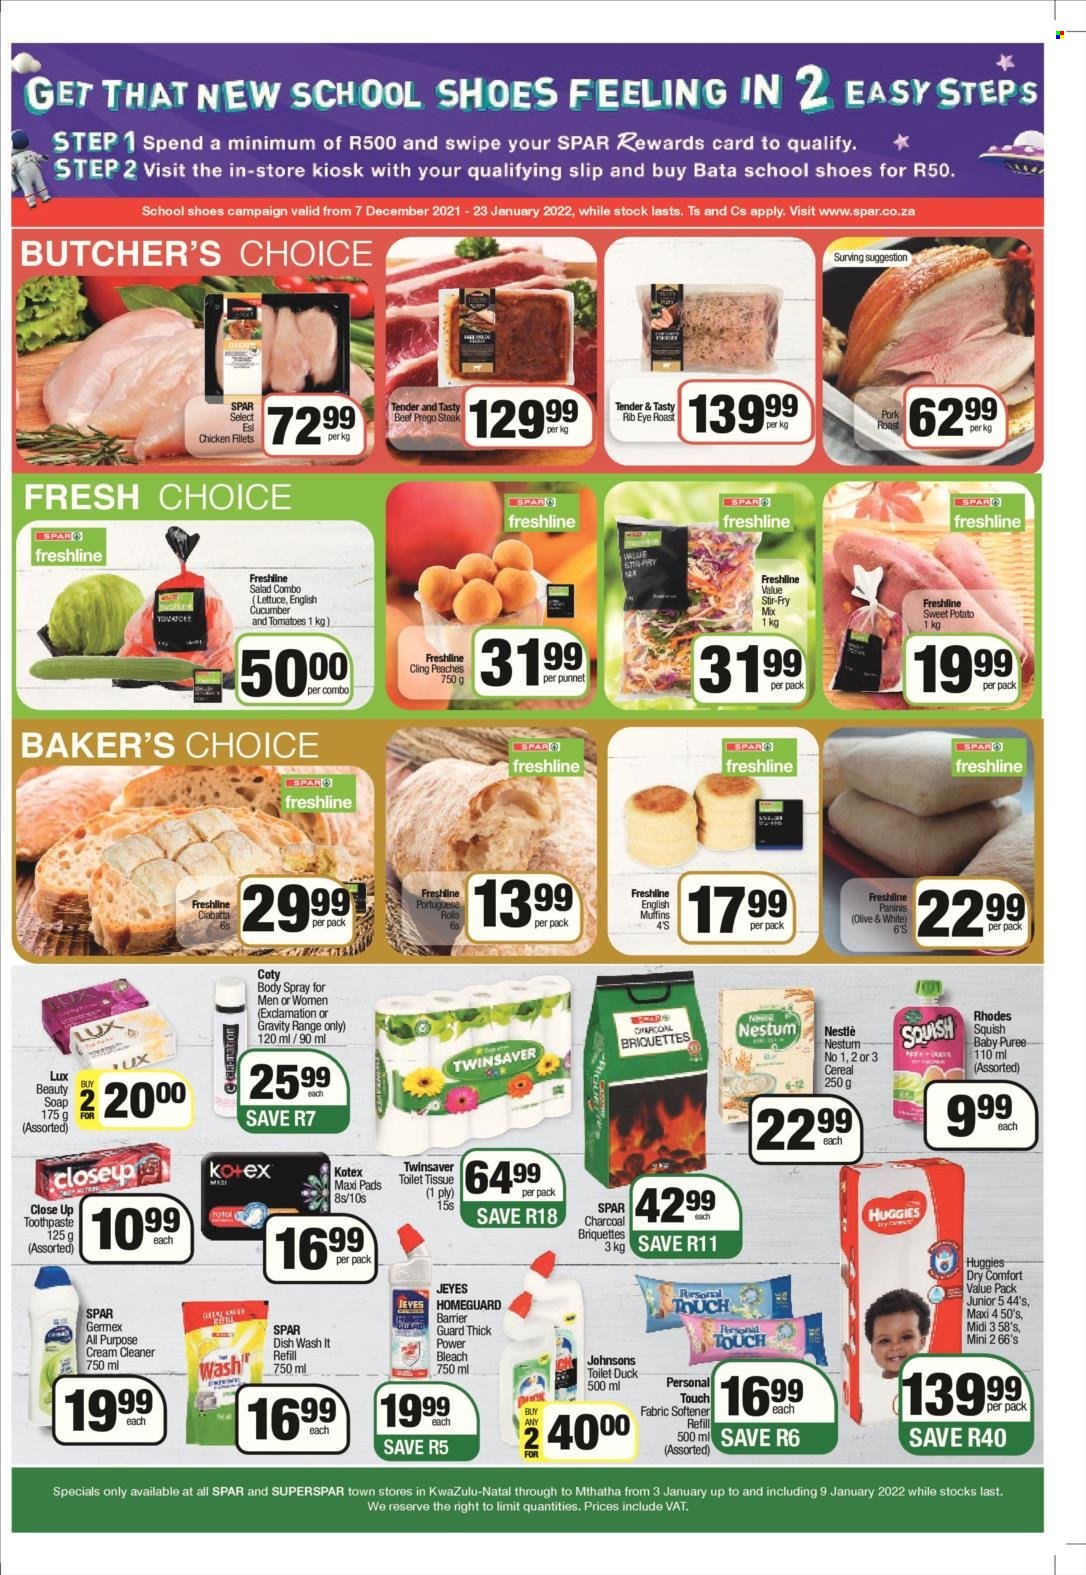 SPAR catalogue  - 03/01/2022 - 09/01/2022 - Sales products - ciabatta, english muffins, sweet potato, salad, Nestlé, cereals, beef meat, steak, rib eye, pork meat, pork roast, Huggies, Johnson's, toilet paper, cream cleaner, bleach, cleaner, fabric softener, dishwashing liquid, Lux, soap, toothpaste, Closeup, sanitary pads, Kotex, body spray, briquettes, peaches. Page 2.